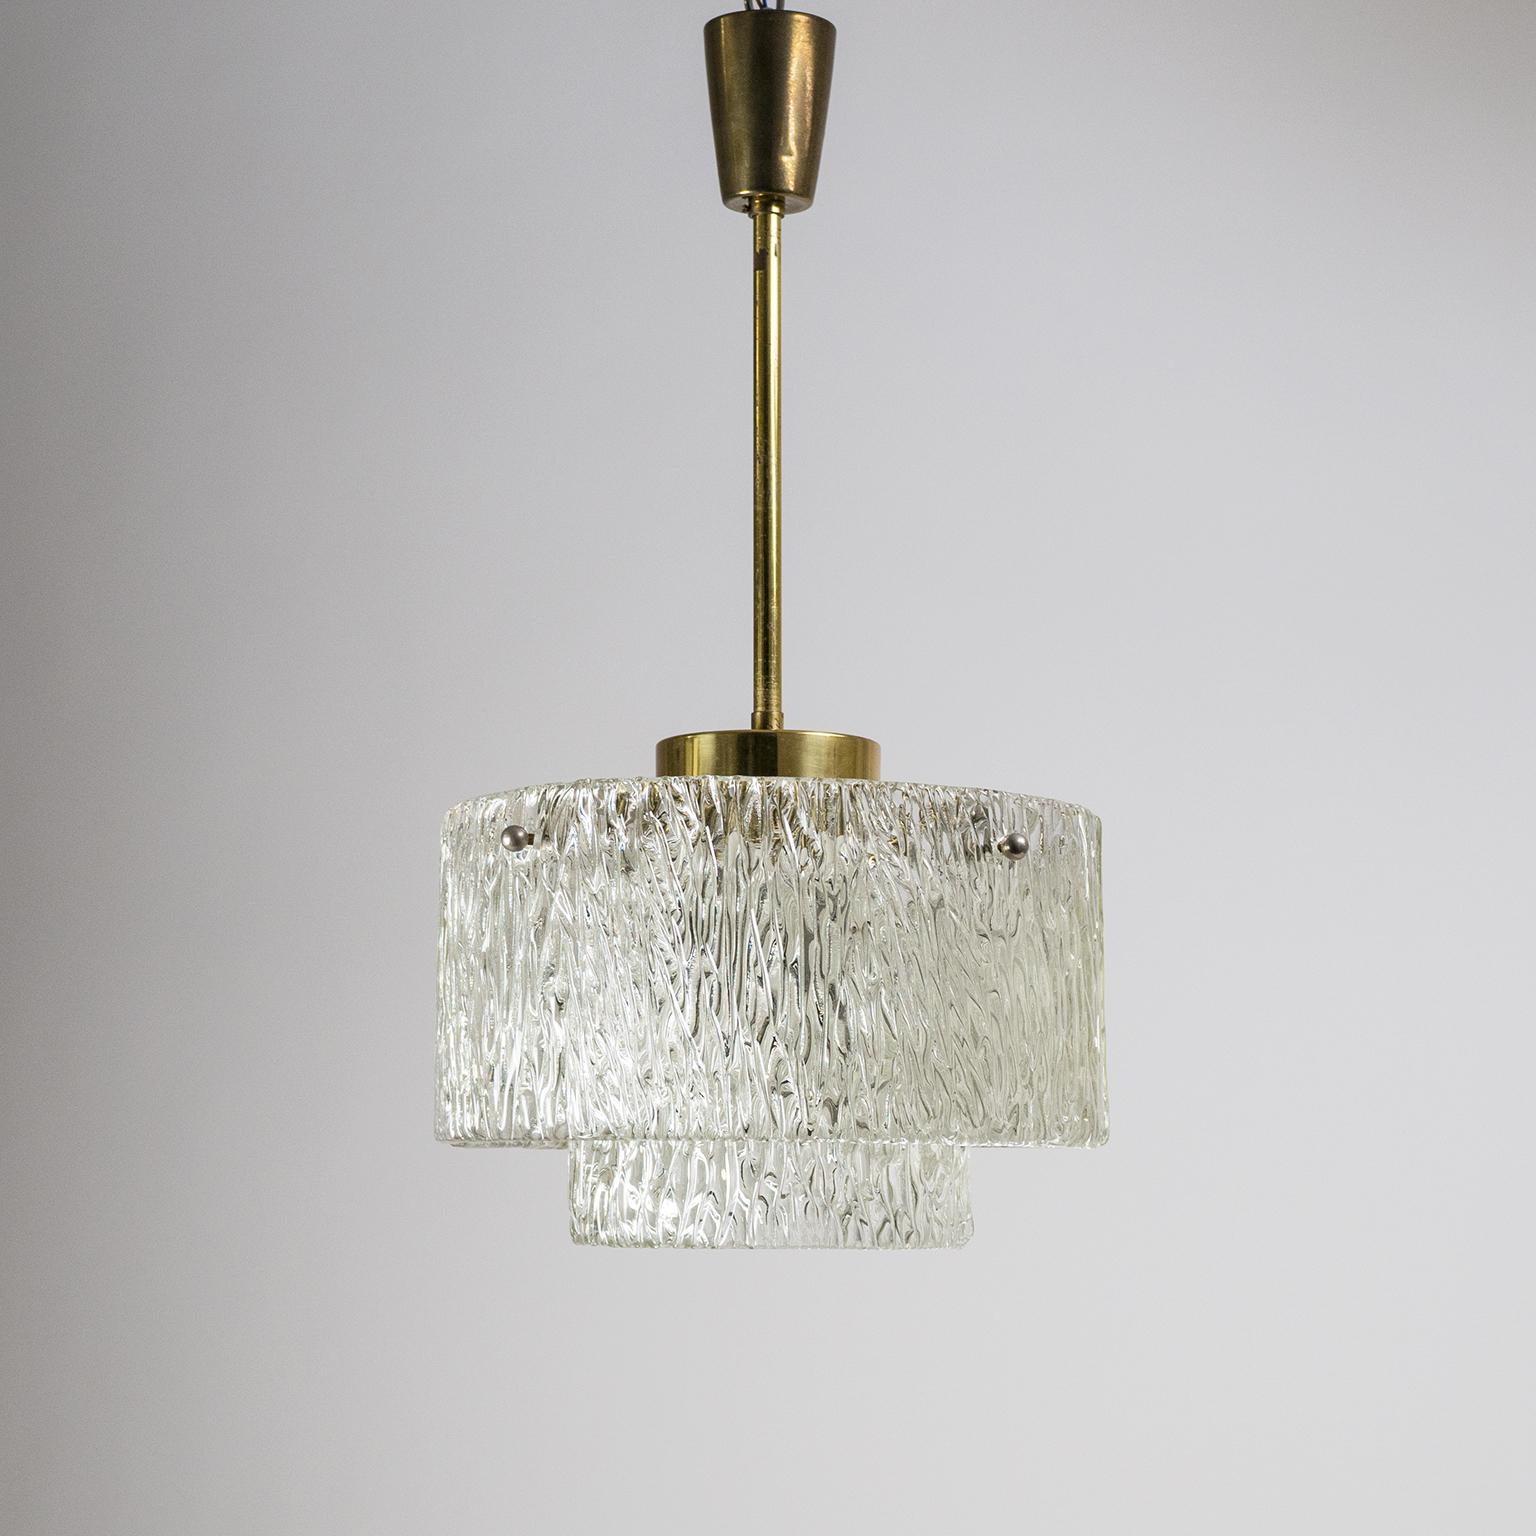 Very nice J.T. Kalmar textured glass and brass chandelier from the 1950s. Suspended from brass hardware and held in place by nickelled knobs are two tiers of heavily textured glass. Very good original condition with patina on the brass parts. One